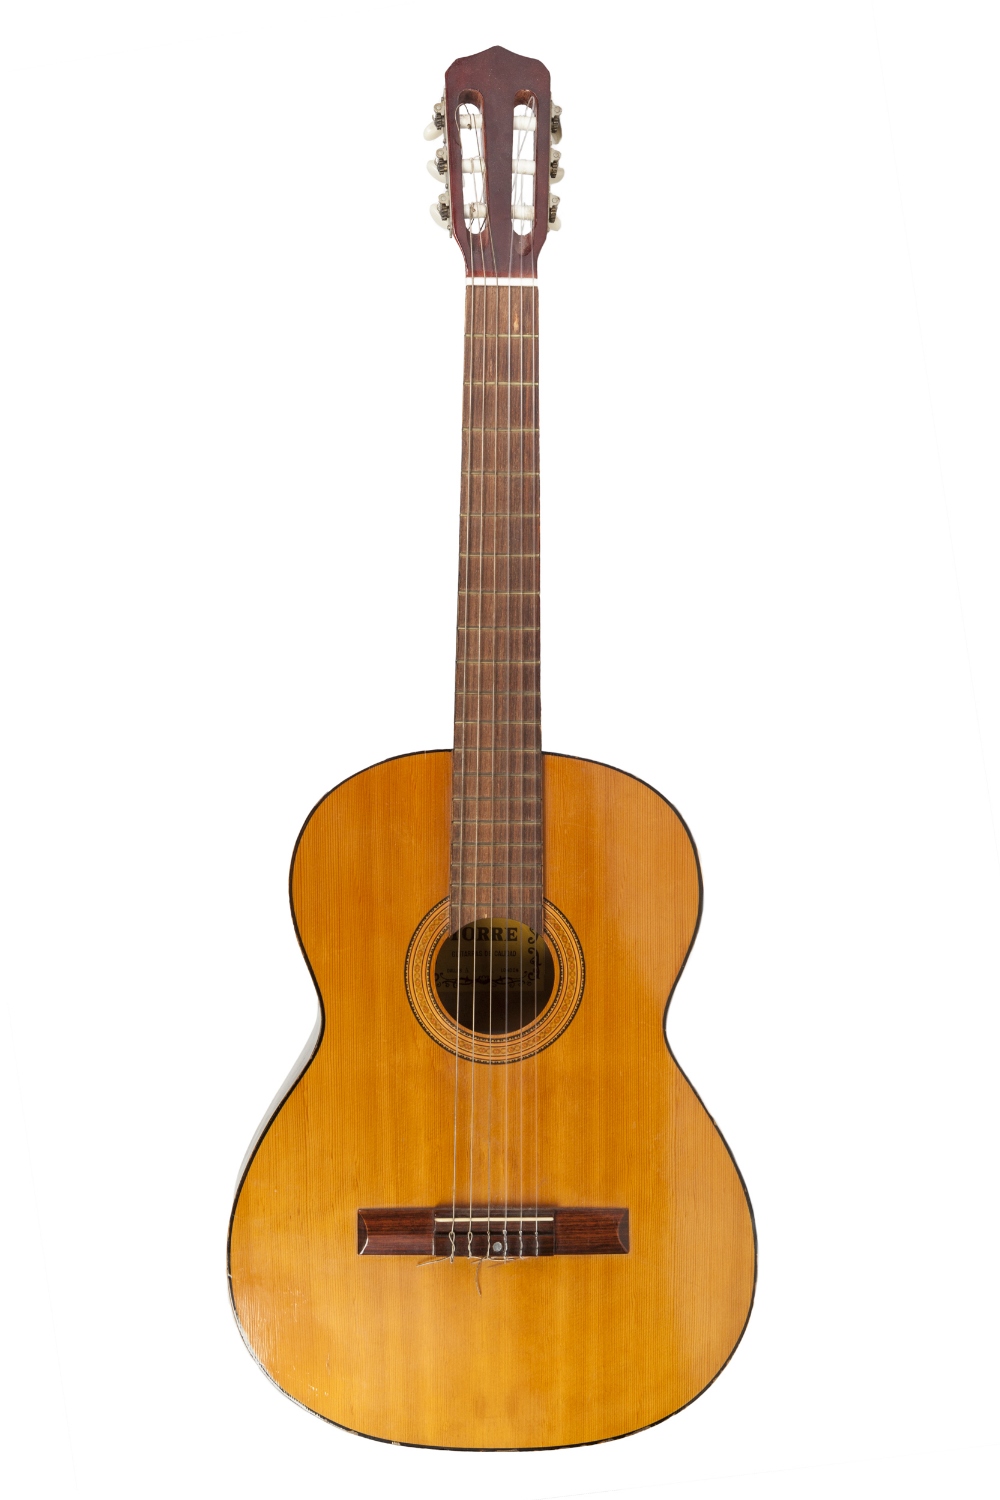 B.M. 'CLASSICO' SIX STRING ACOUSTIC GUITAR, labelled 'Made in Spain' and ANOTHER SPANISH ACOUSTIC - Image 2 of 2